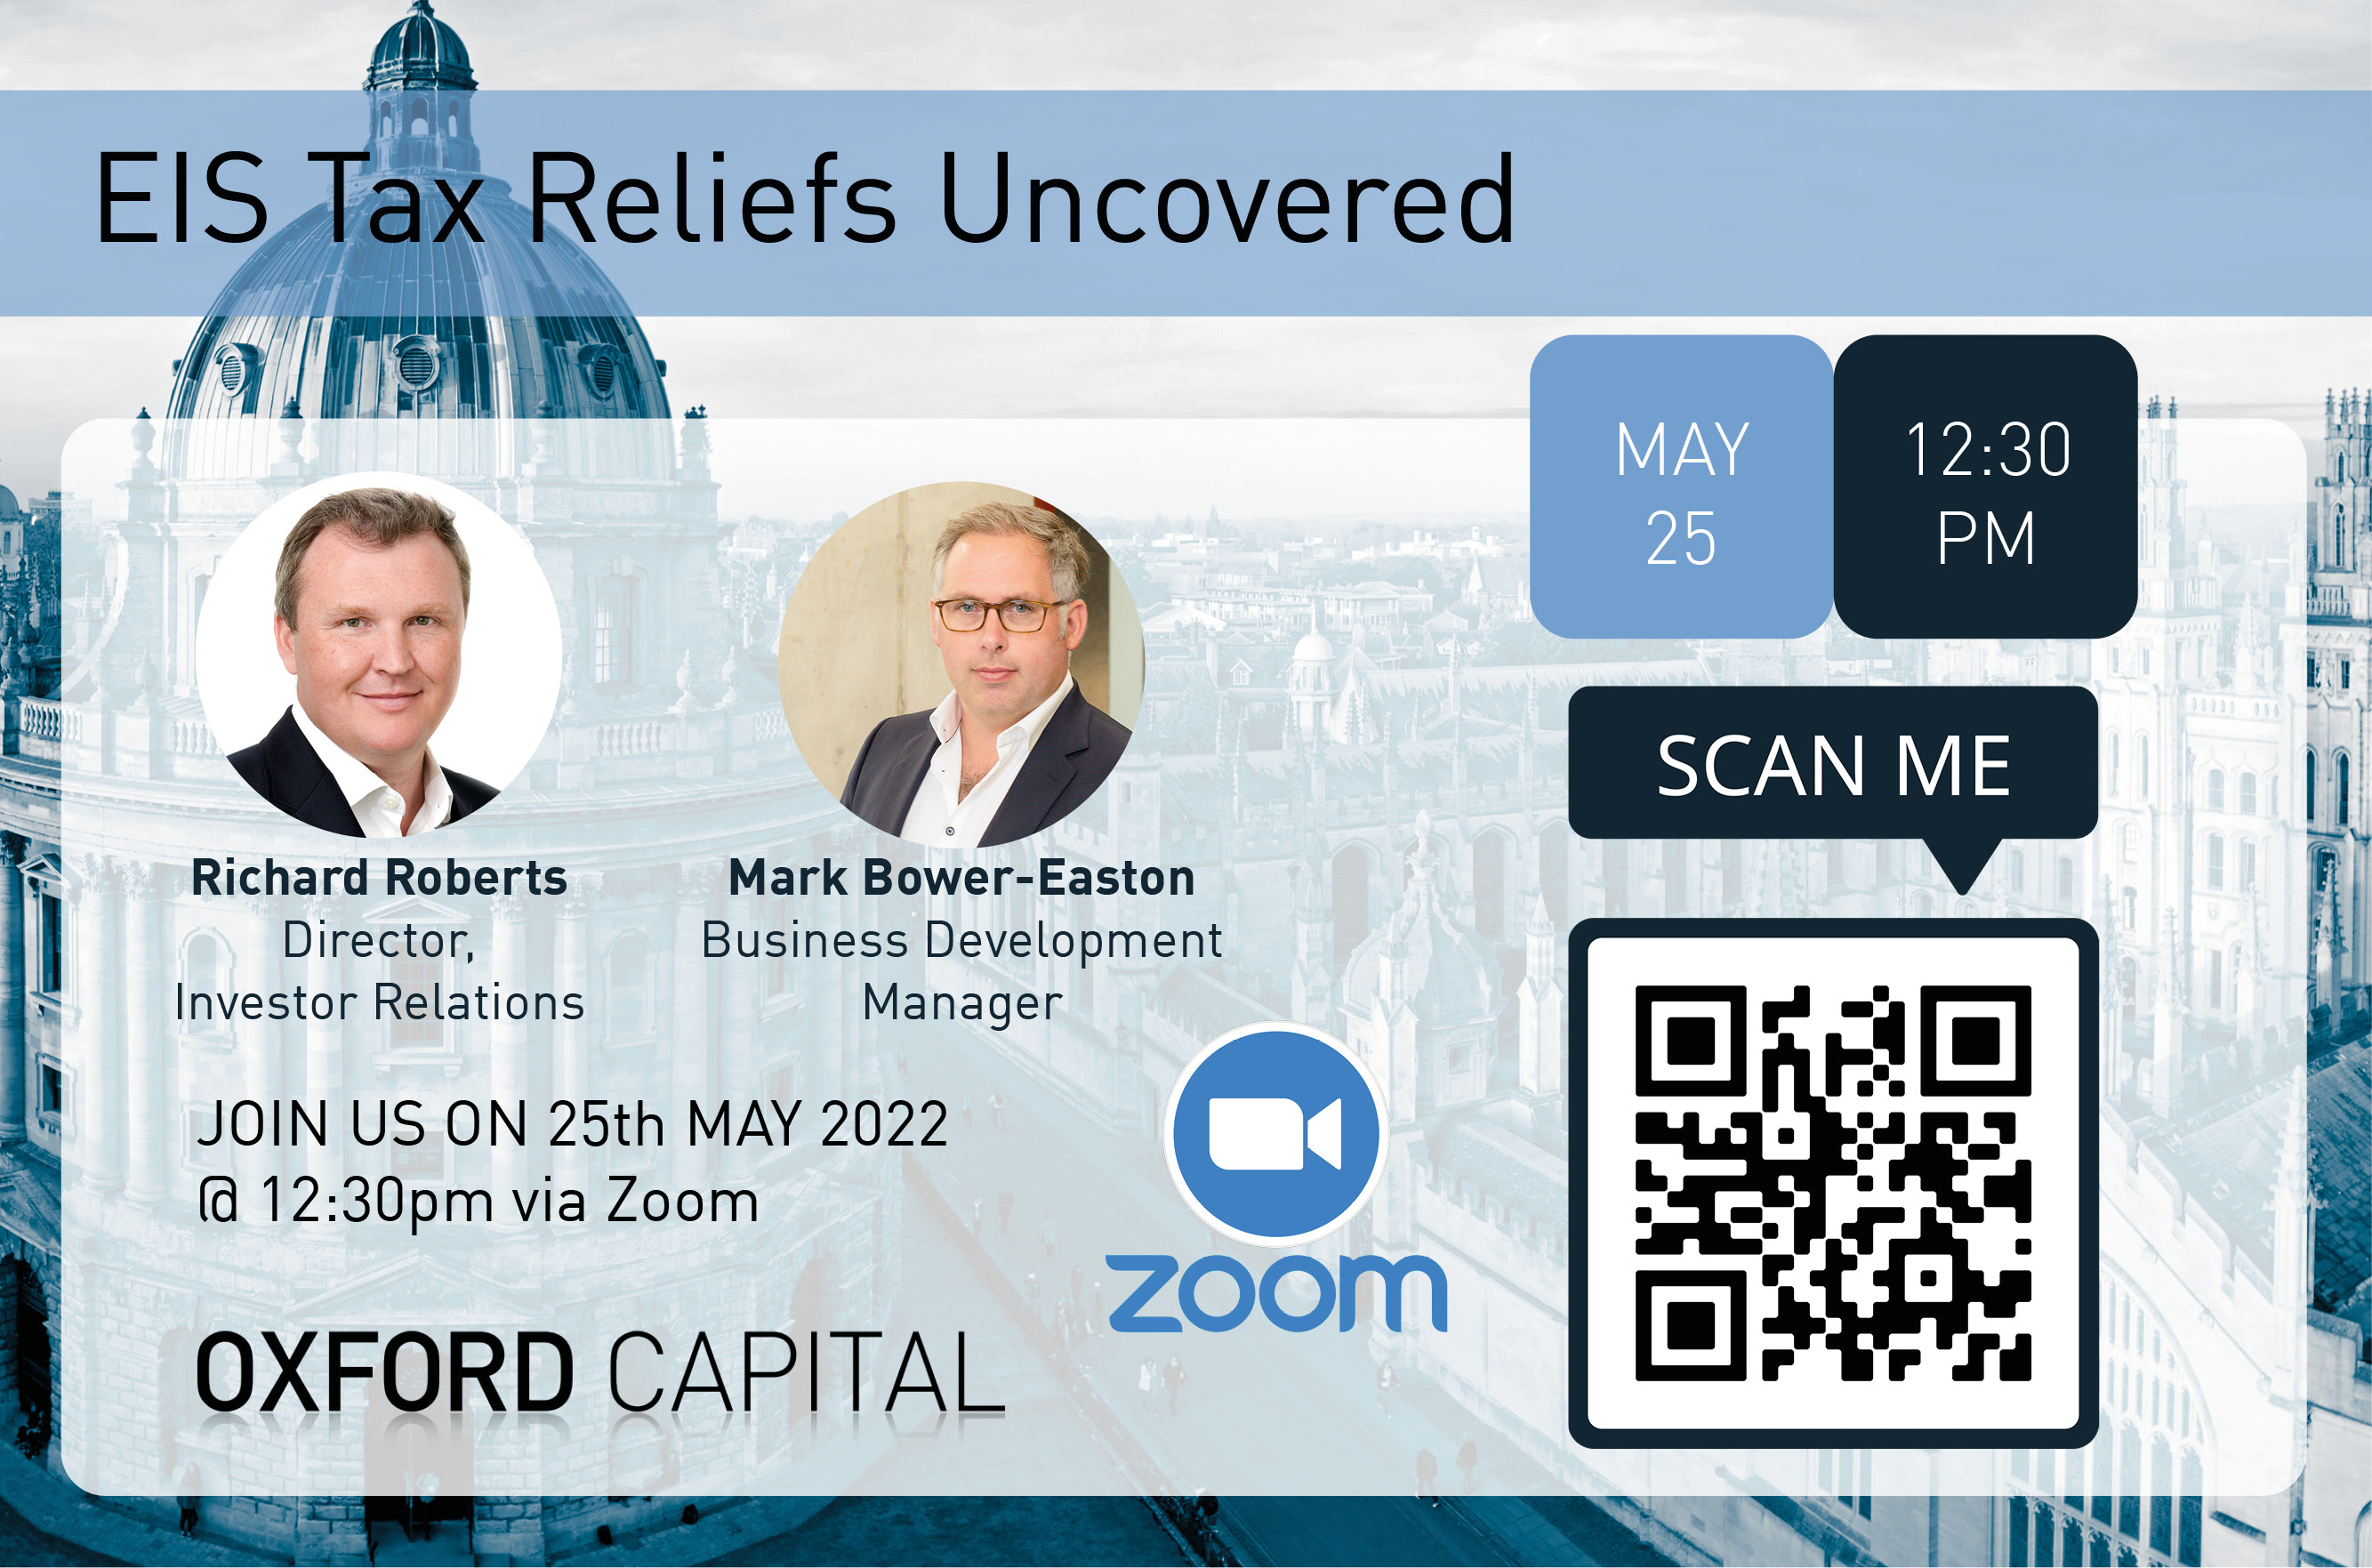 eis-tax-reliefs-uncovered-with-oxford-capital-wednesday-25th-may-at